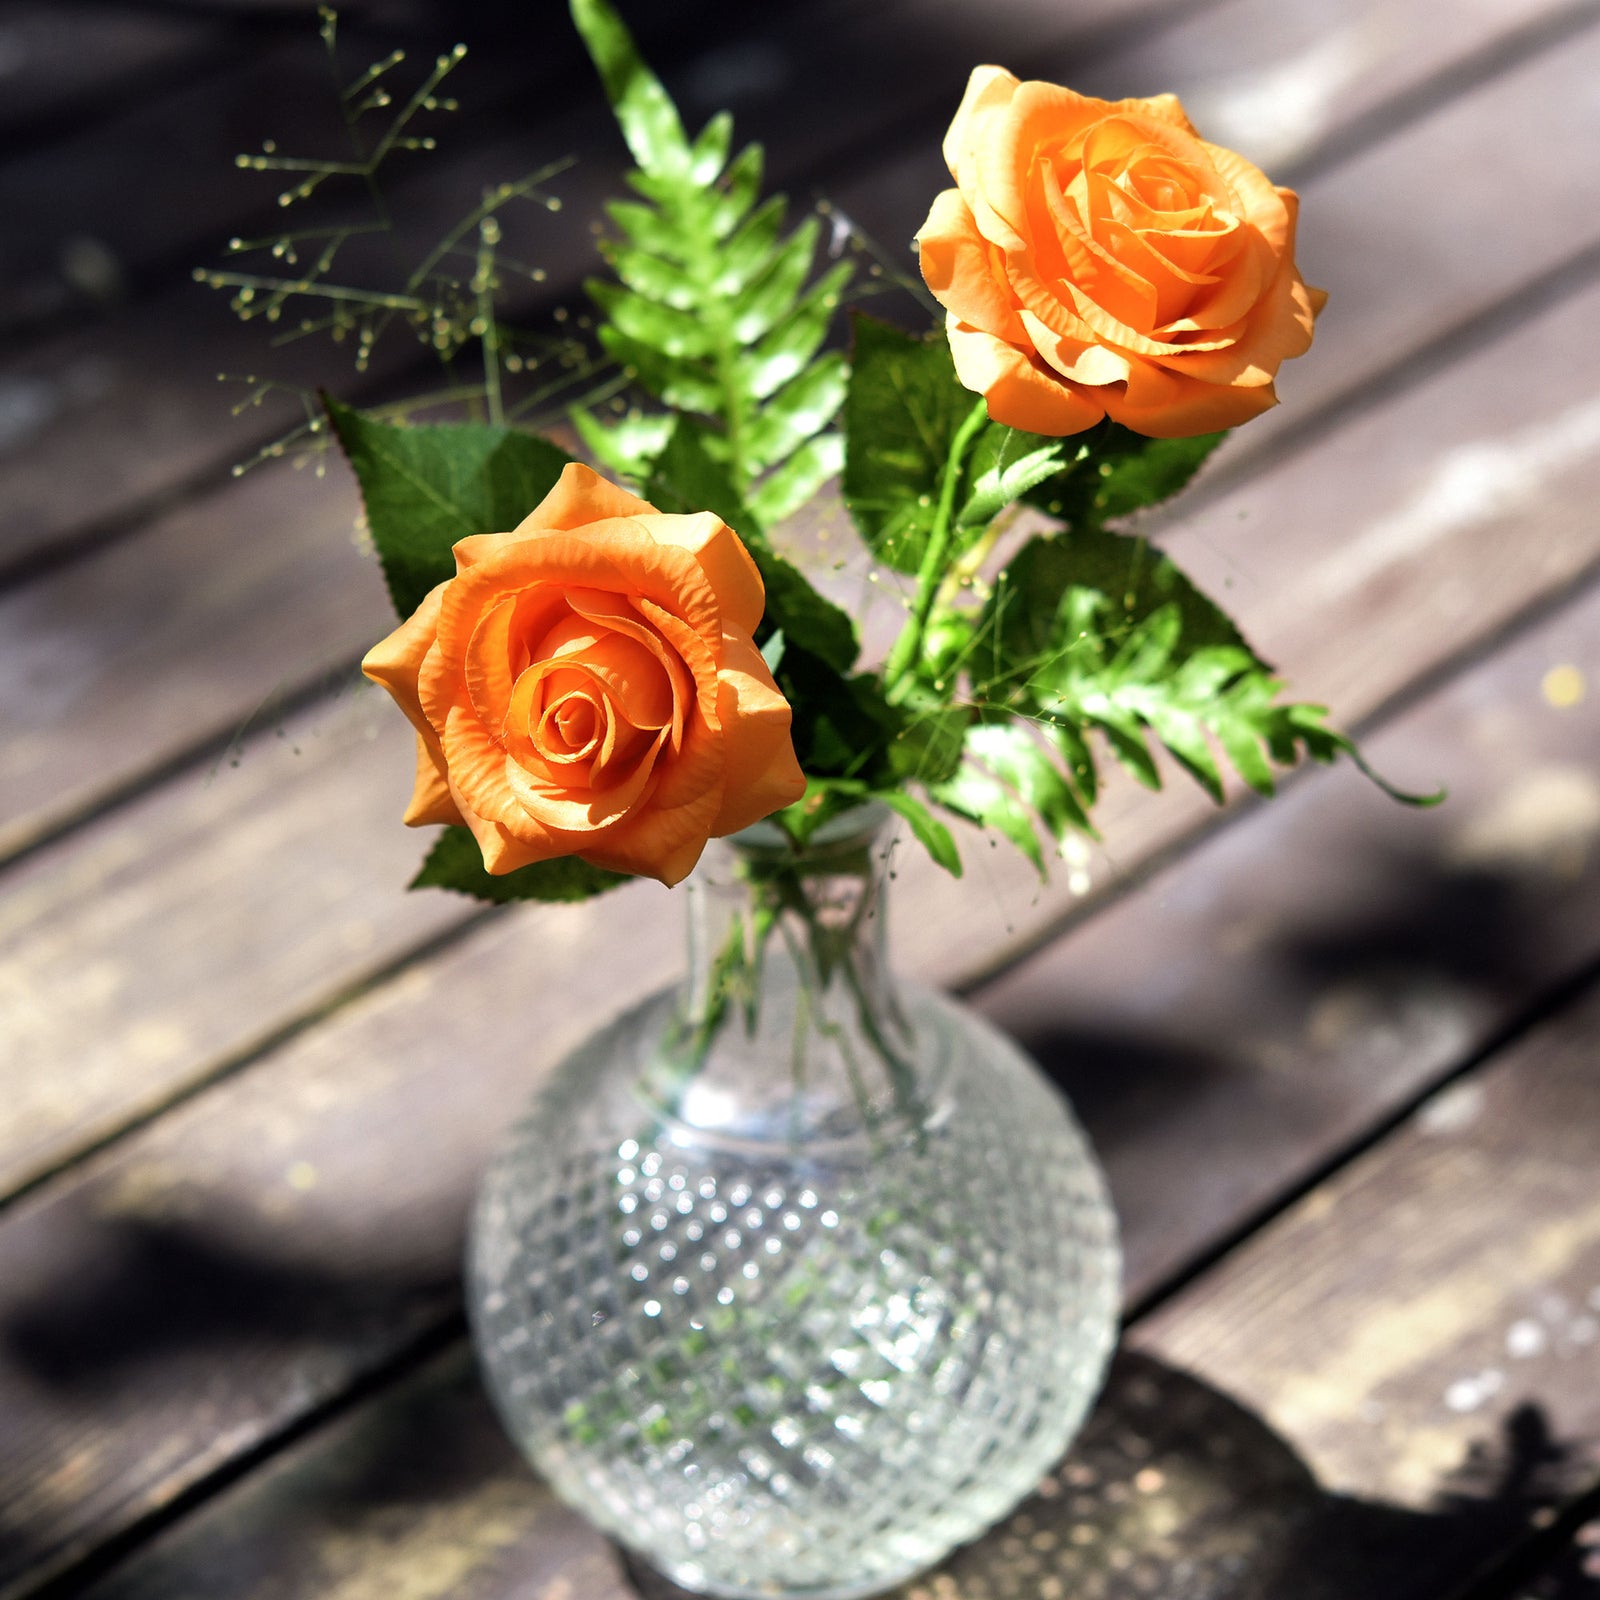 Real Touch 10 Stems Orange Silk Artificial Roses Flowers ‘Petals Feel and Look like Fresh Roses'